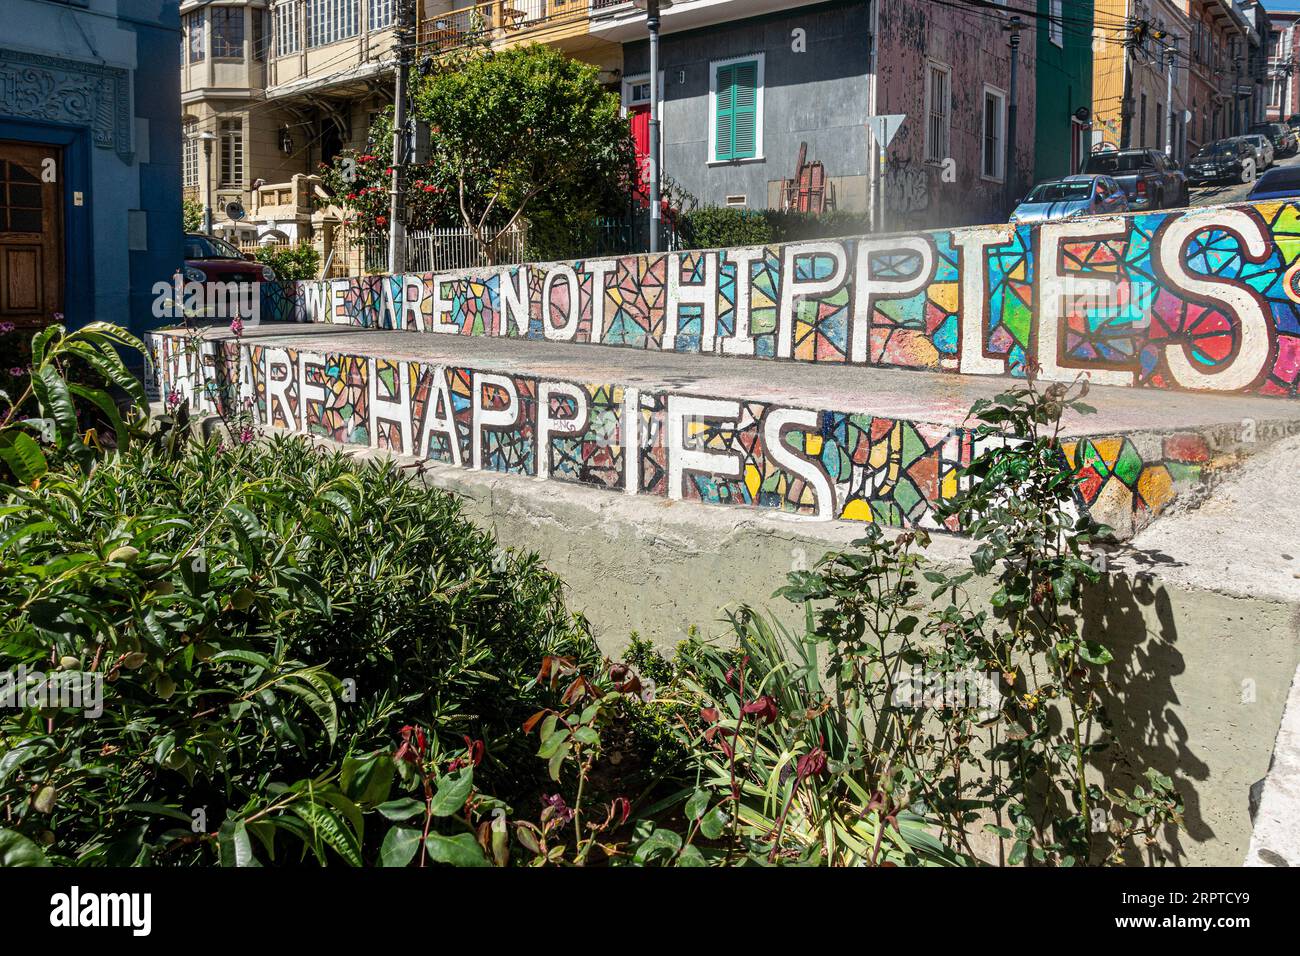 'We are not Hippies, we are Happies' - iconic street art by Art+Believe, 2014 and restored by locals after defacement in 2017. Templeman, Valparaiso c Stock Photo